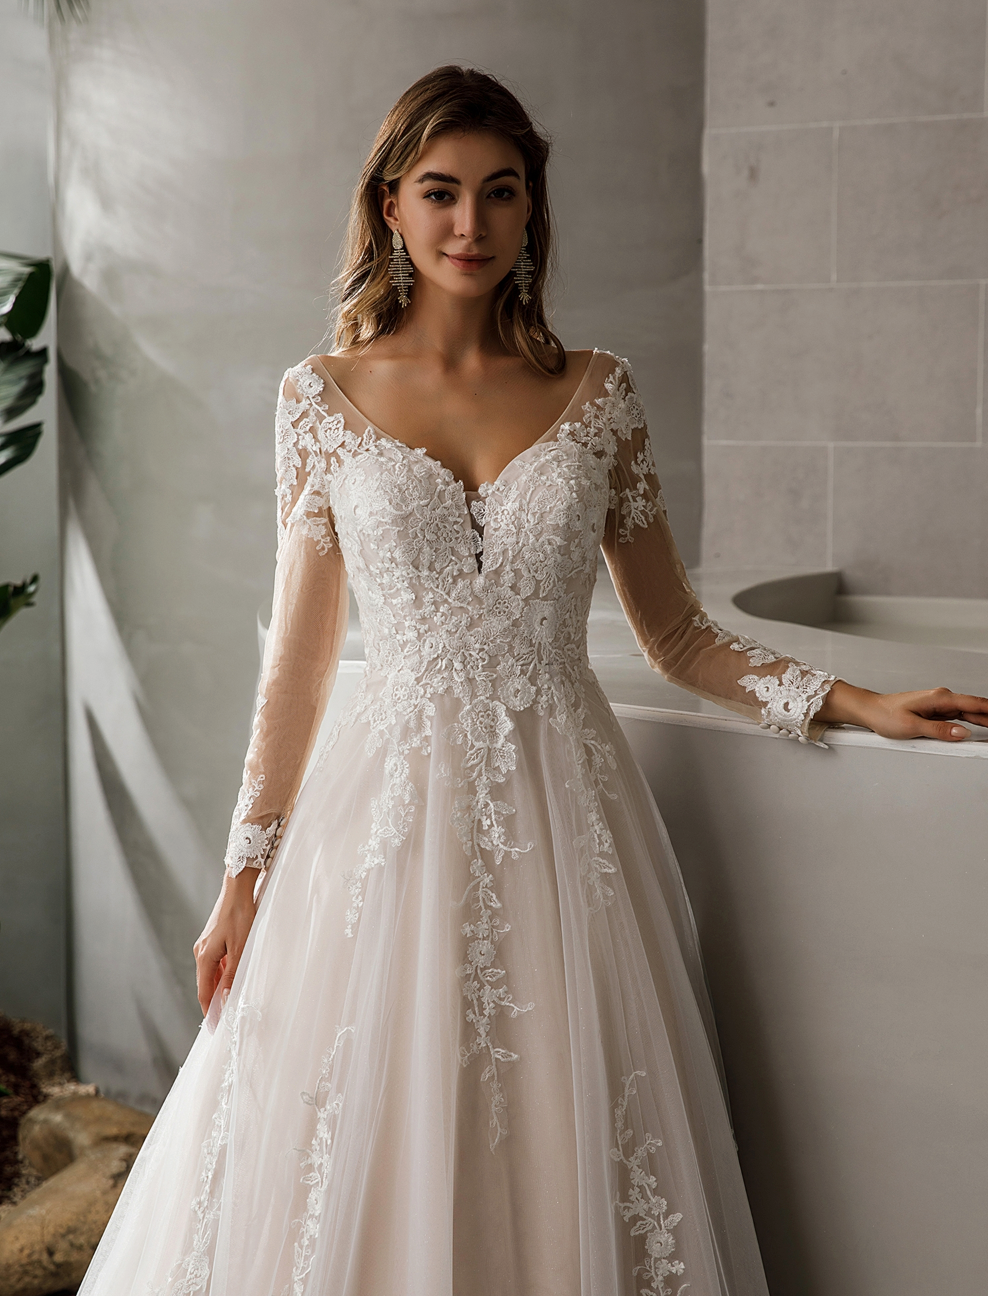 Classic Princess Wedding Dress With V-Neck and Long Sleeves